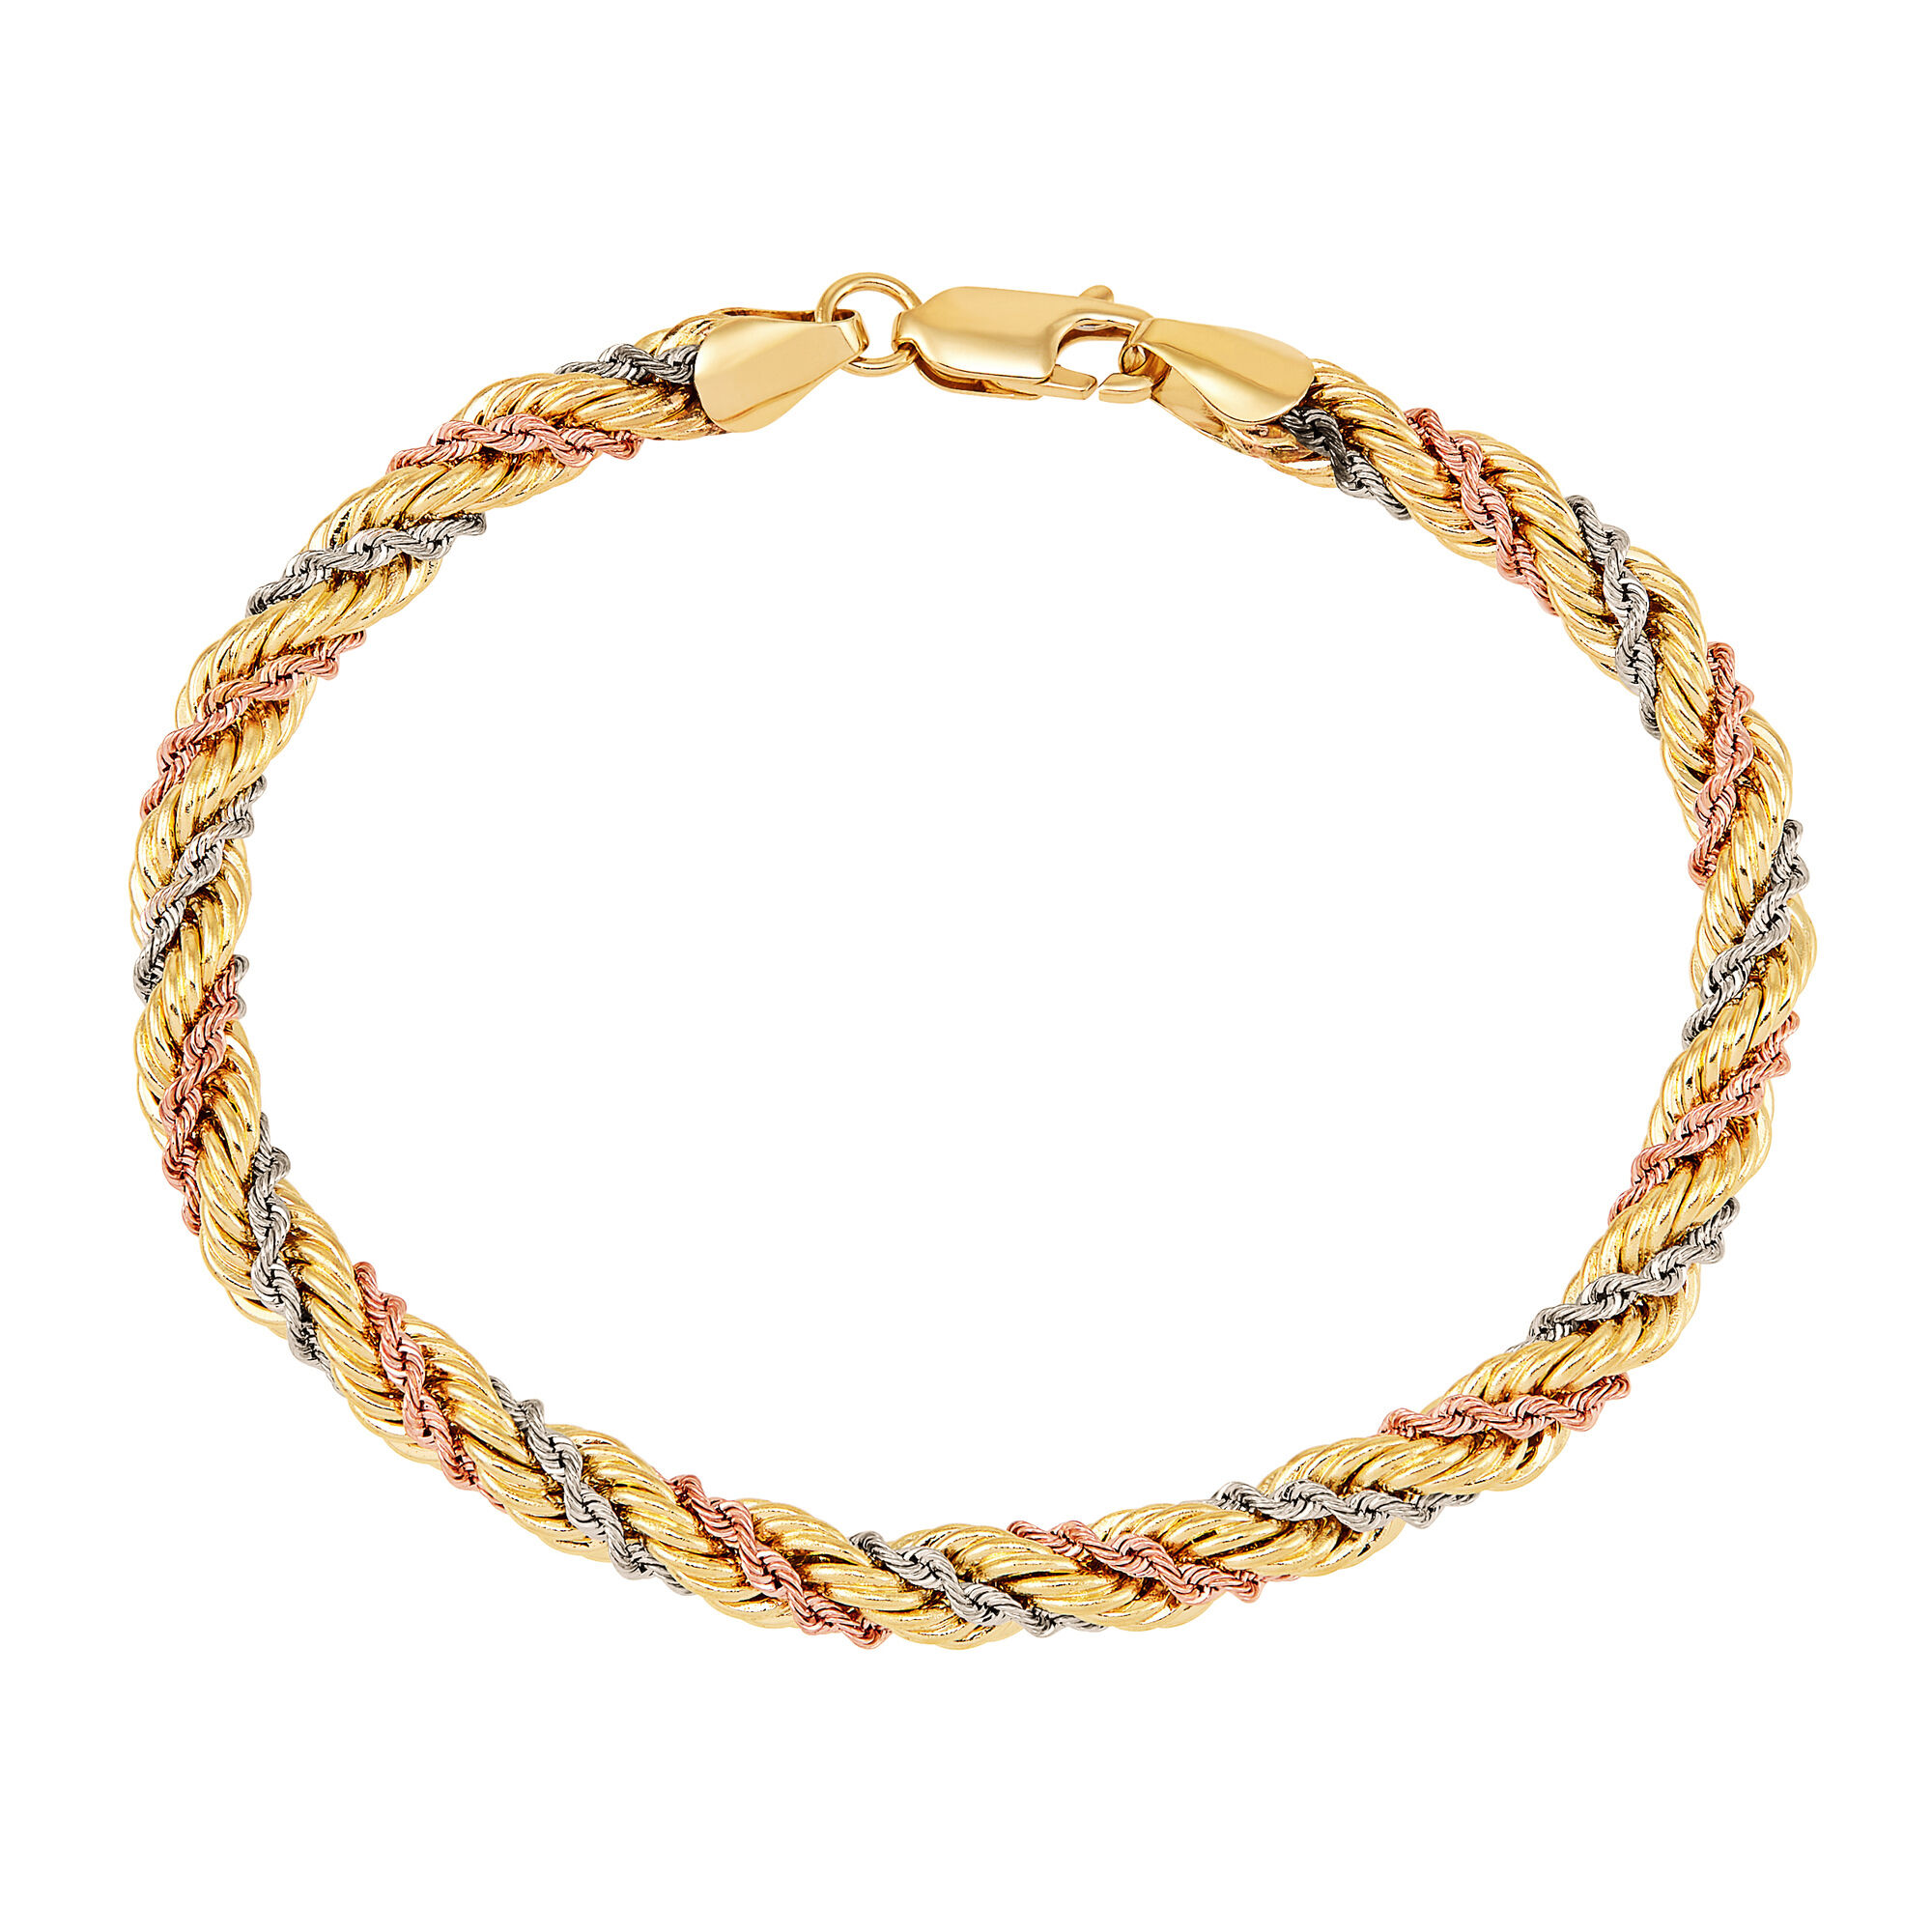 Buy Gold Rope Bracelet Chain, Gold Twisted Bracelet Men Solid Link Chain,  Mens Gold Bracelets 3mm / 5mm Minimalist & Statement Bracelets Jewelry  Online in India - Etsy